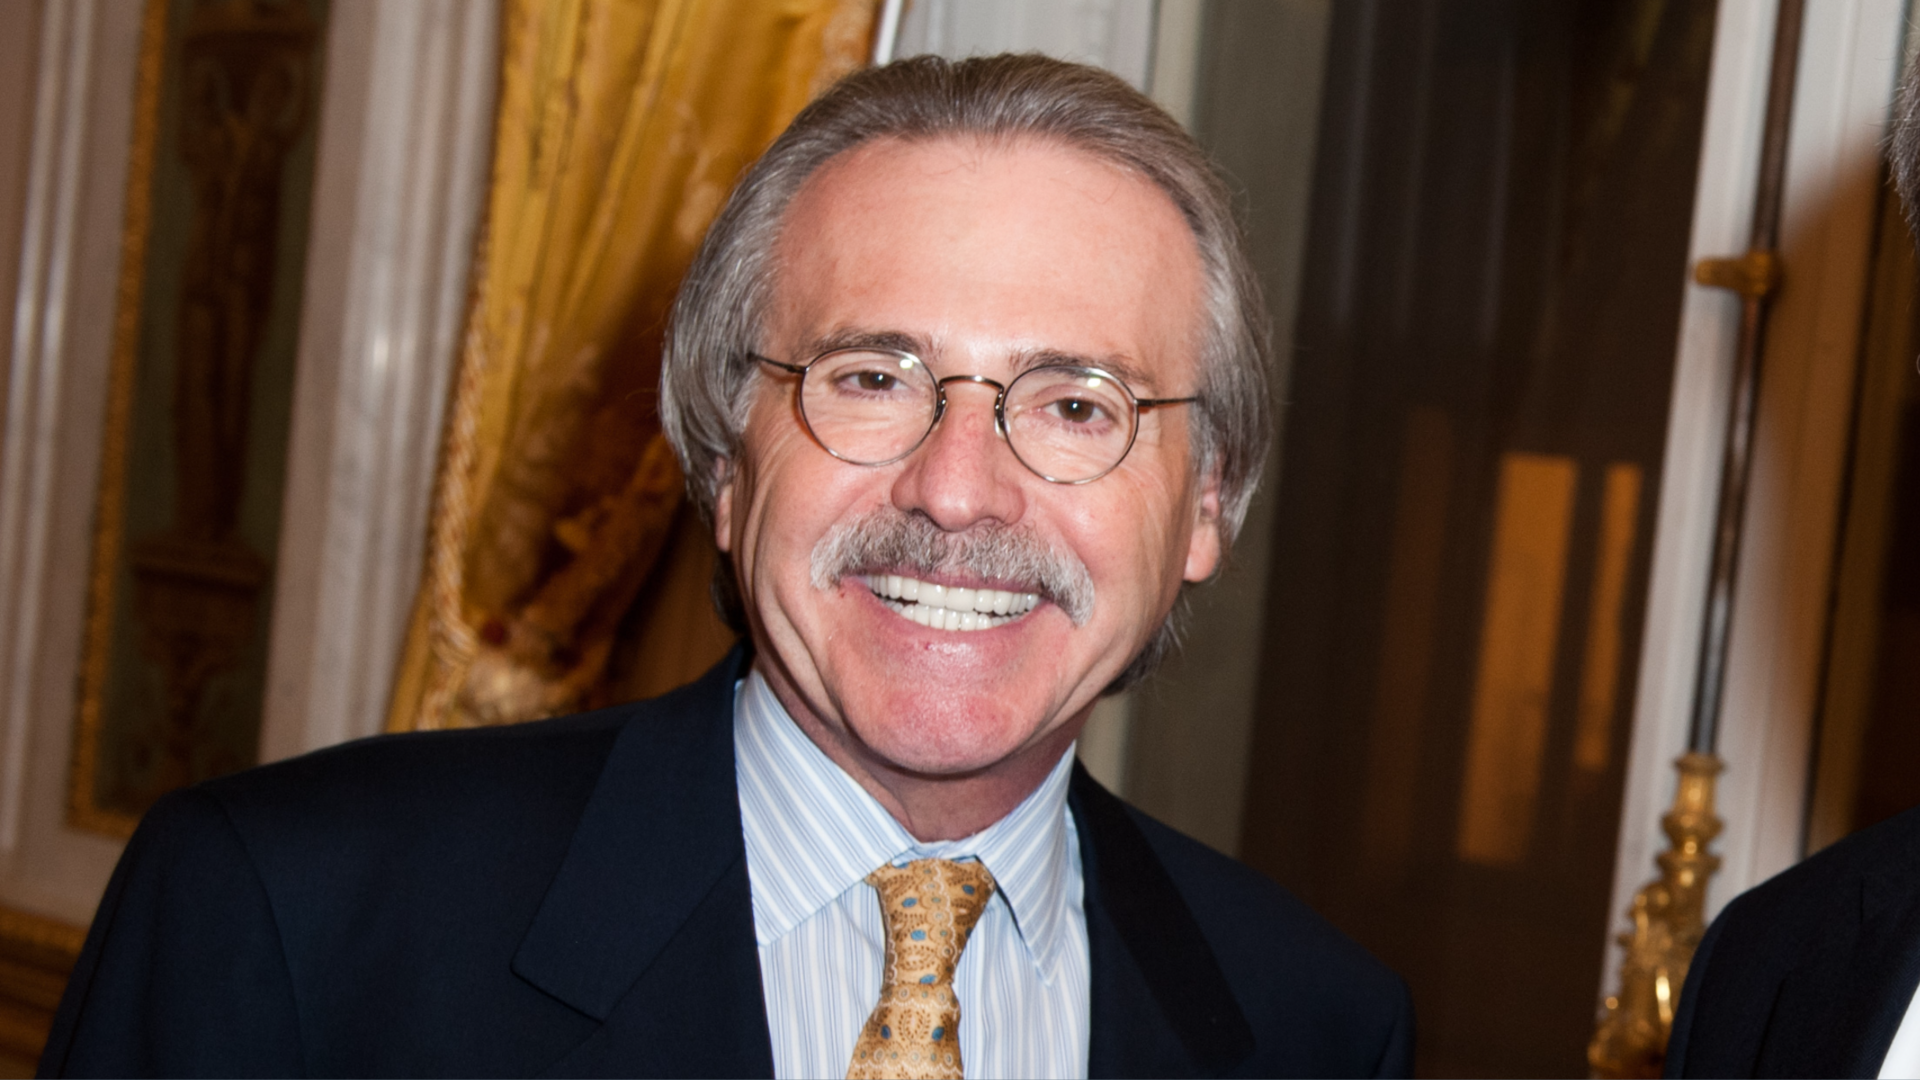 David Pecker at the 'Shape France' Magazine cocktail launch at Hotel Talleyrand on January 19, 2012 in Paris, France. (Photo by Francois Durand/Getty Images)